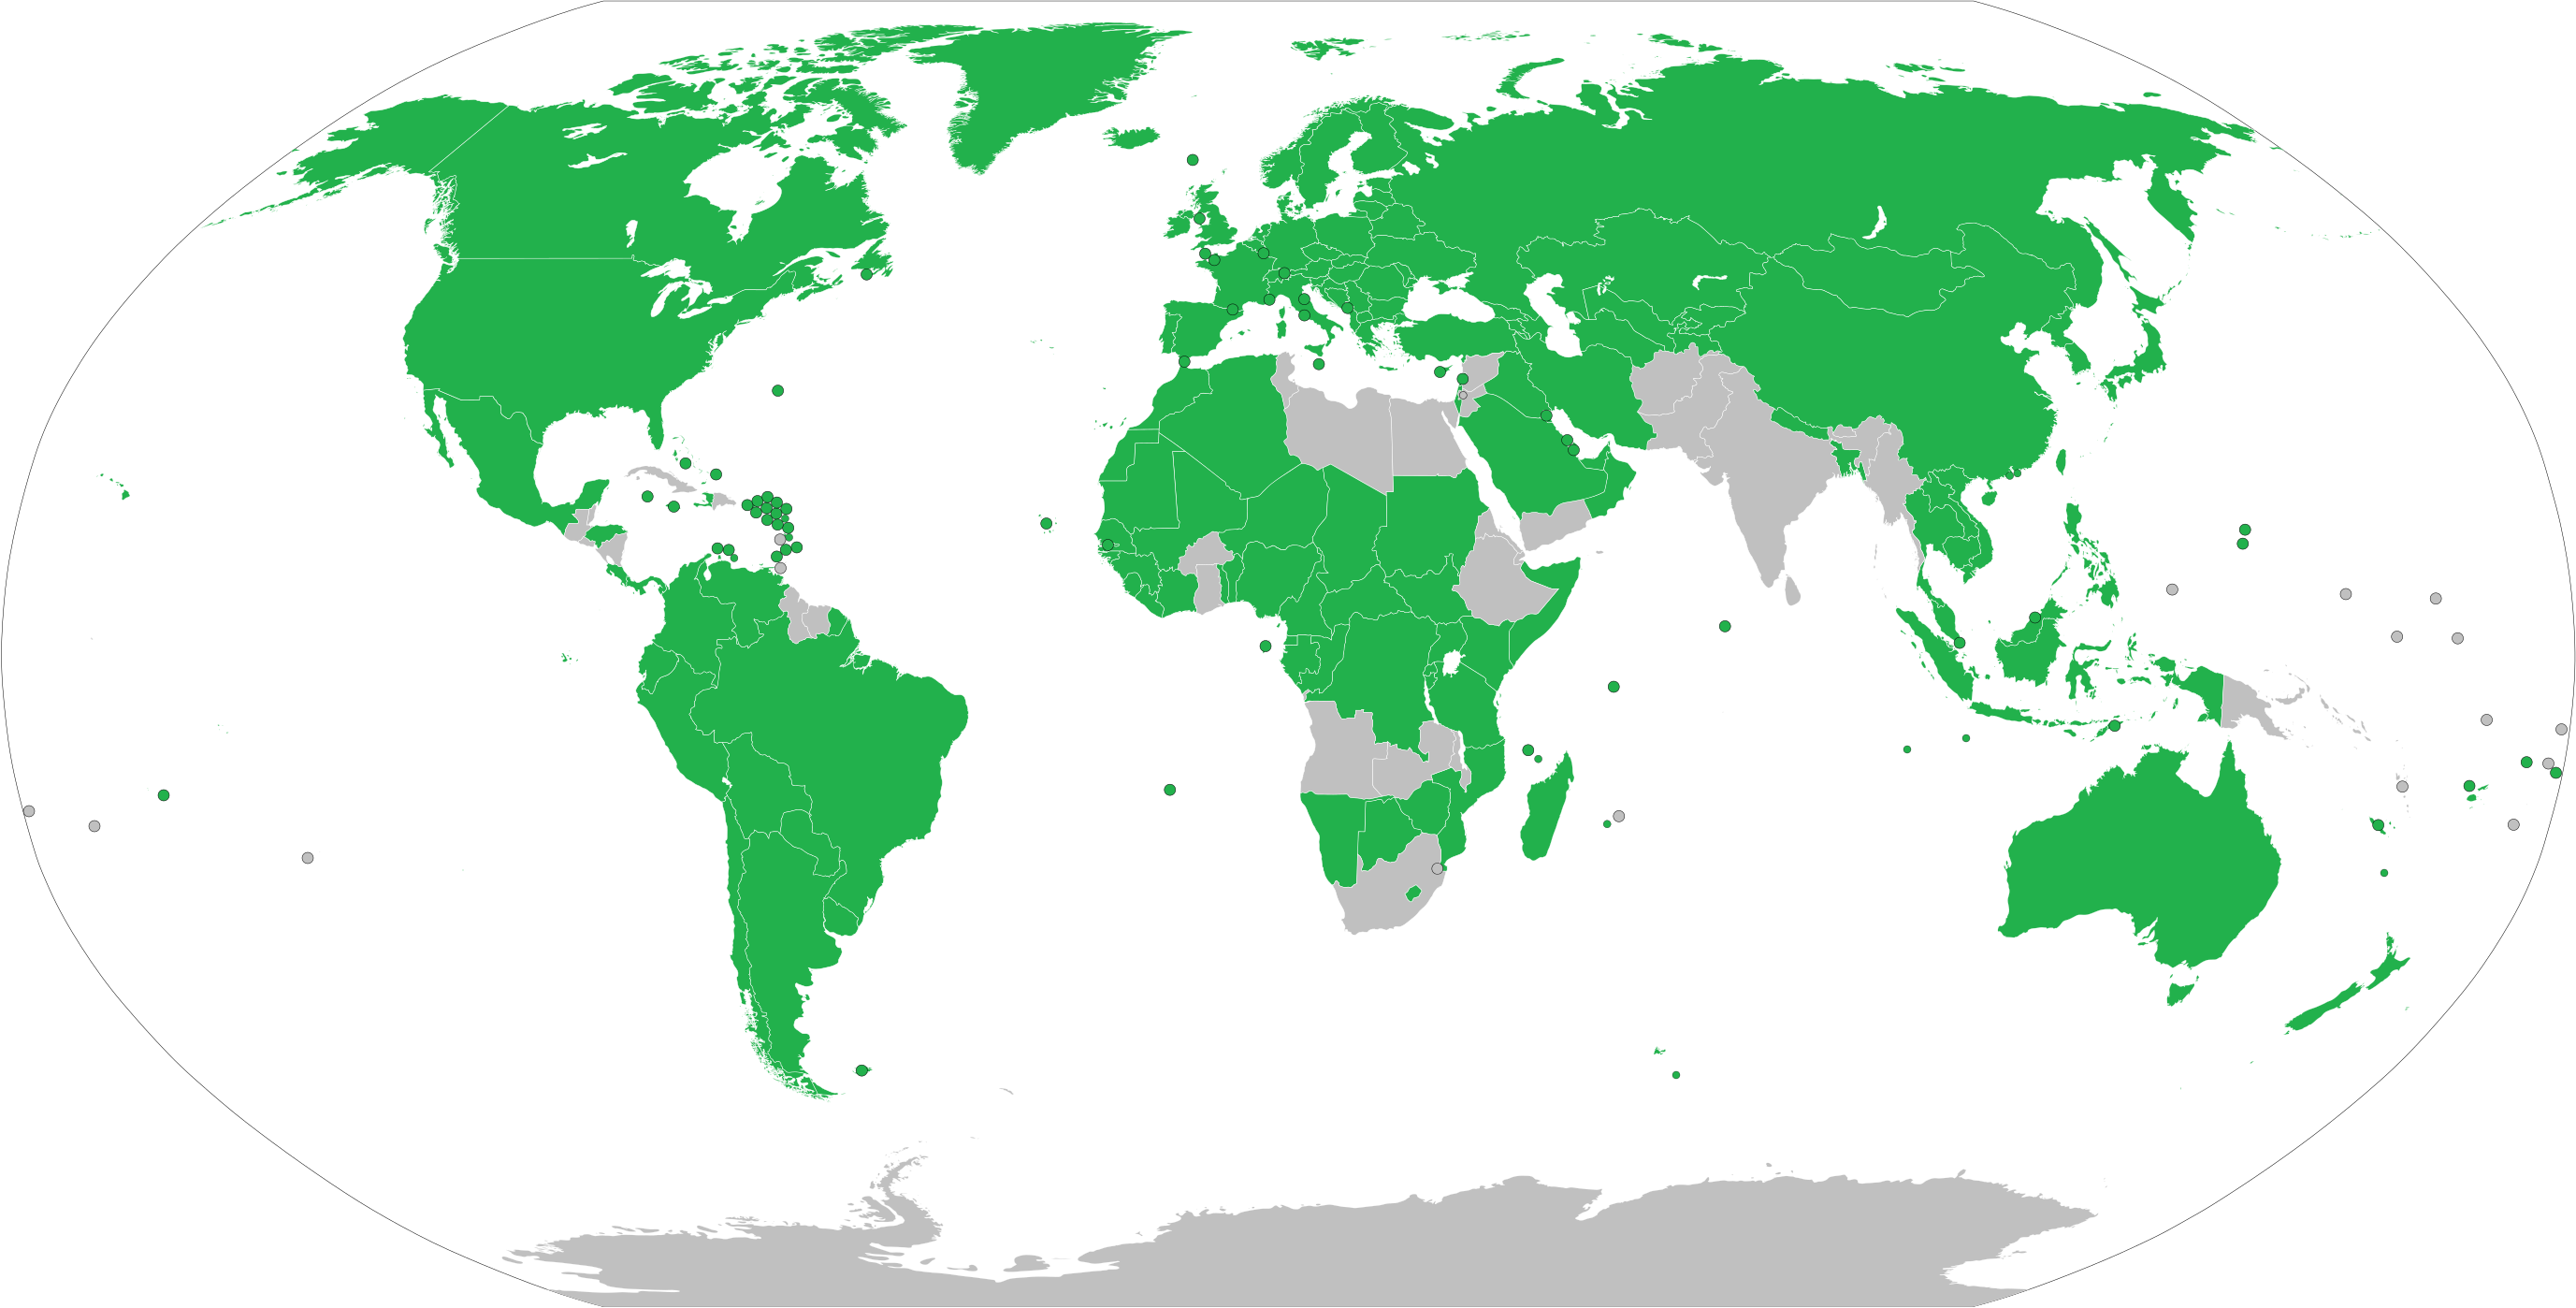 A World map showing the Countries that offer Biometric Passports.